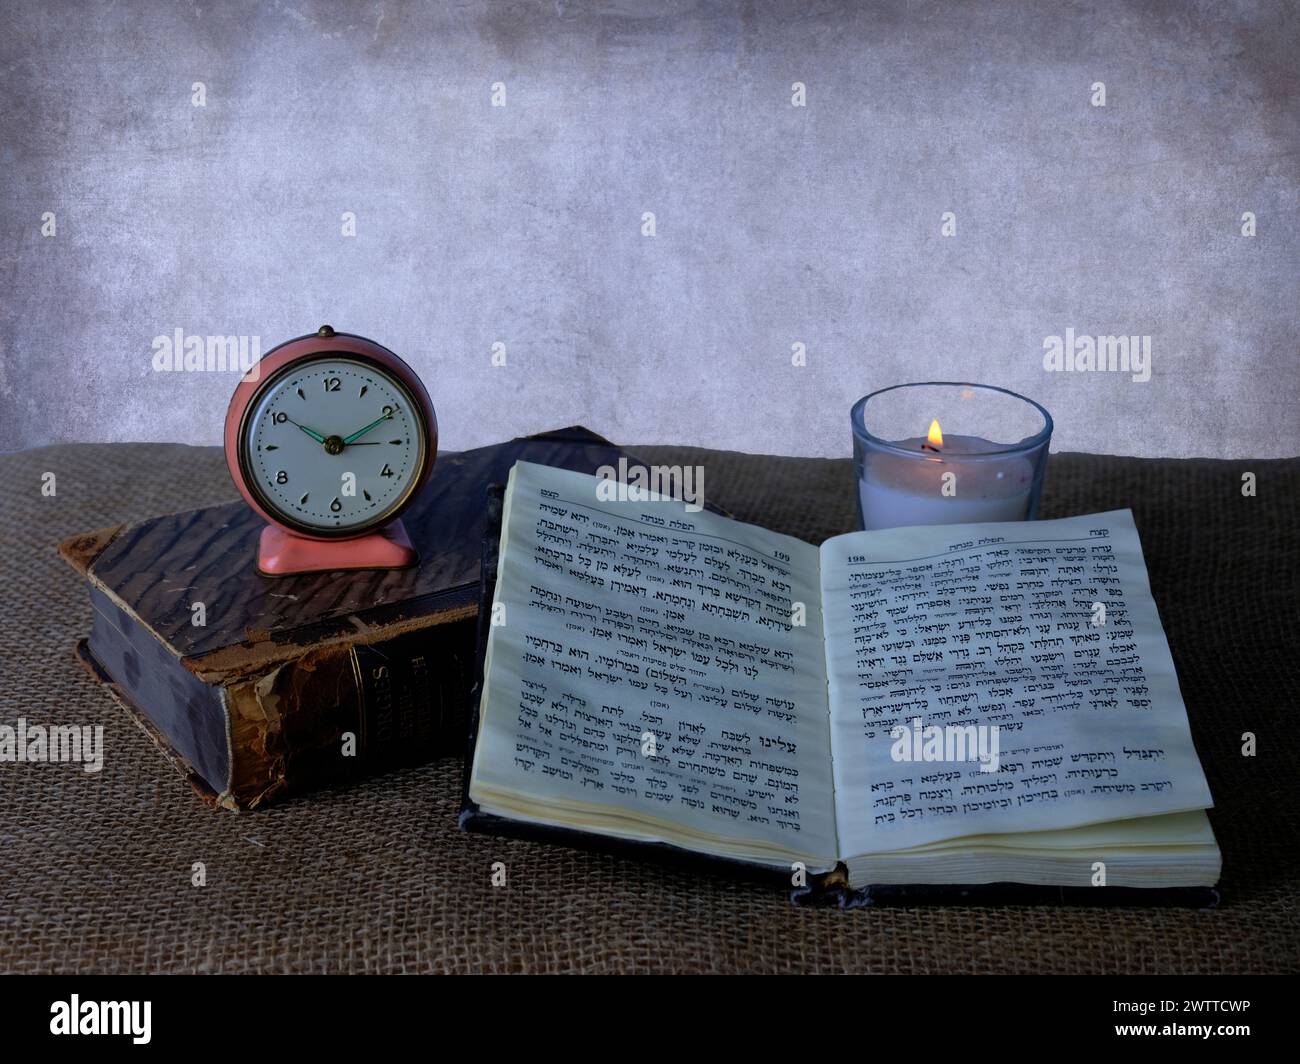 Timeless serenity with a vintage clock, flickering candle, and an open book Stock Photo